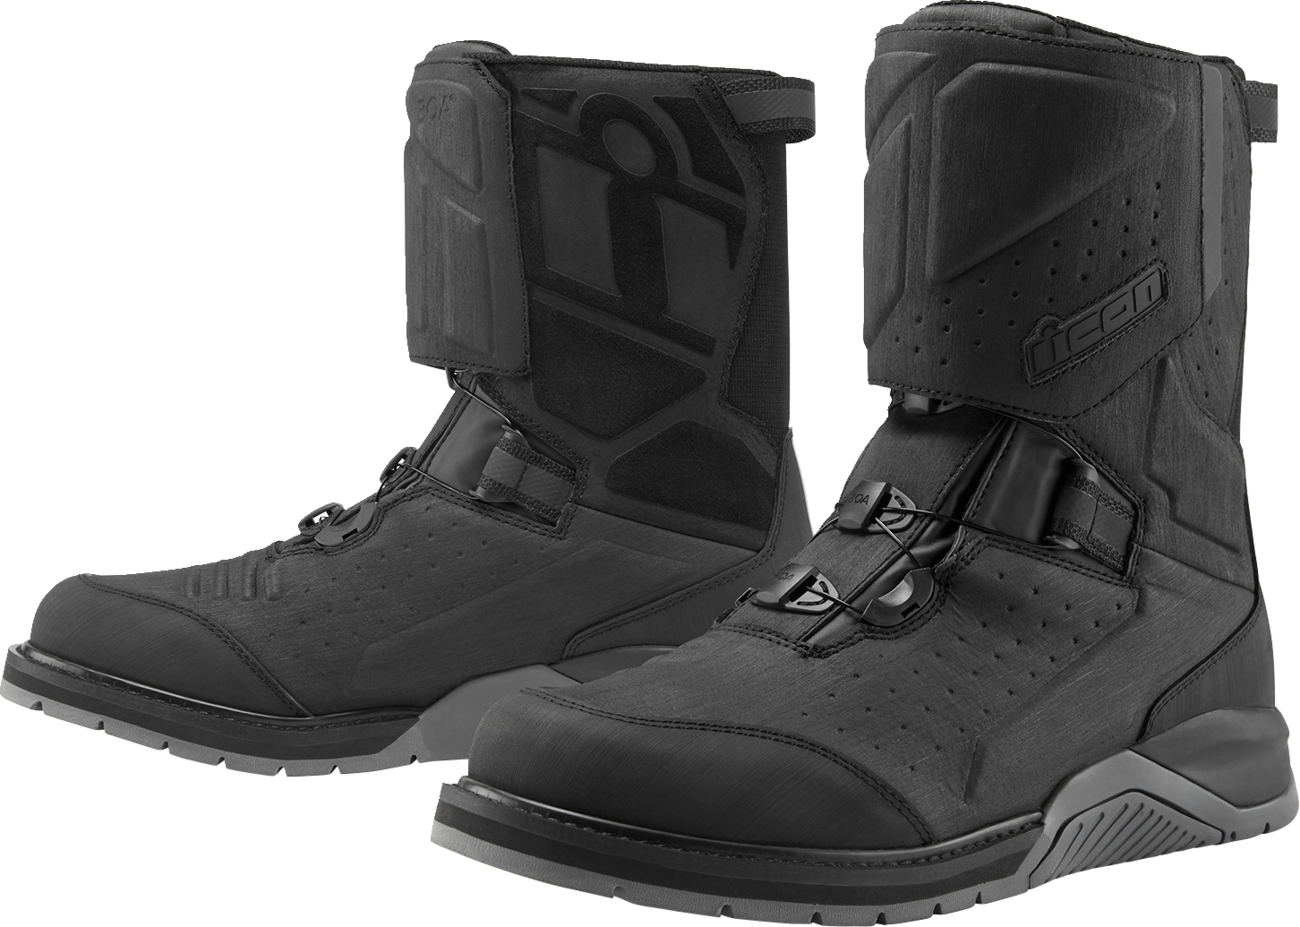 ICON Alcan Waterproof Boots - Black - Size 13 3403-1242